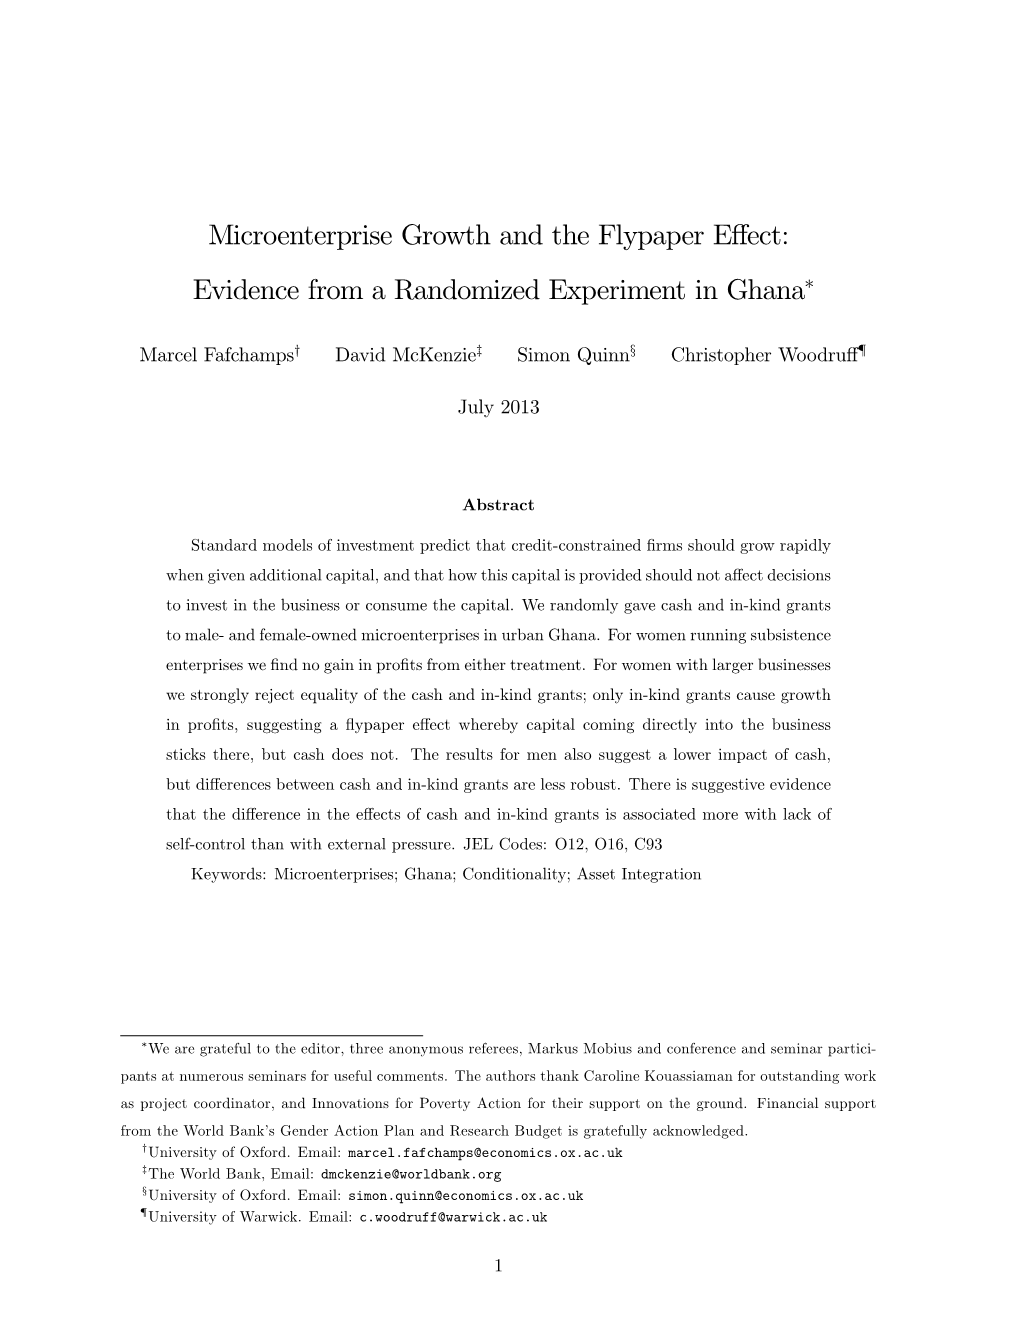 Microenterprise Growth and the Flypaper Effect: Evidence from A